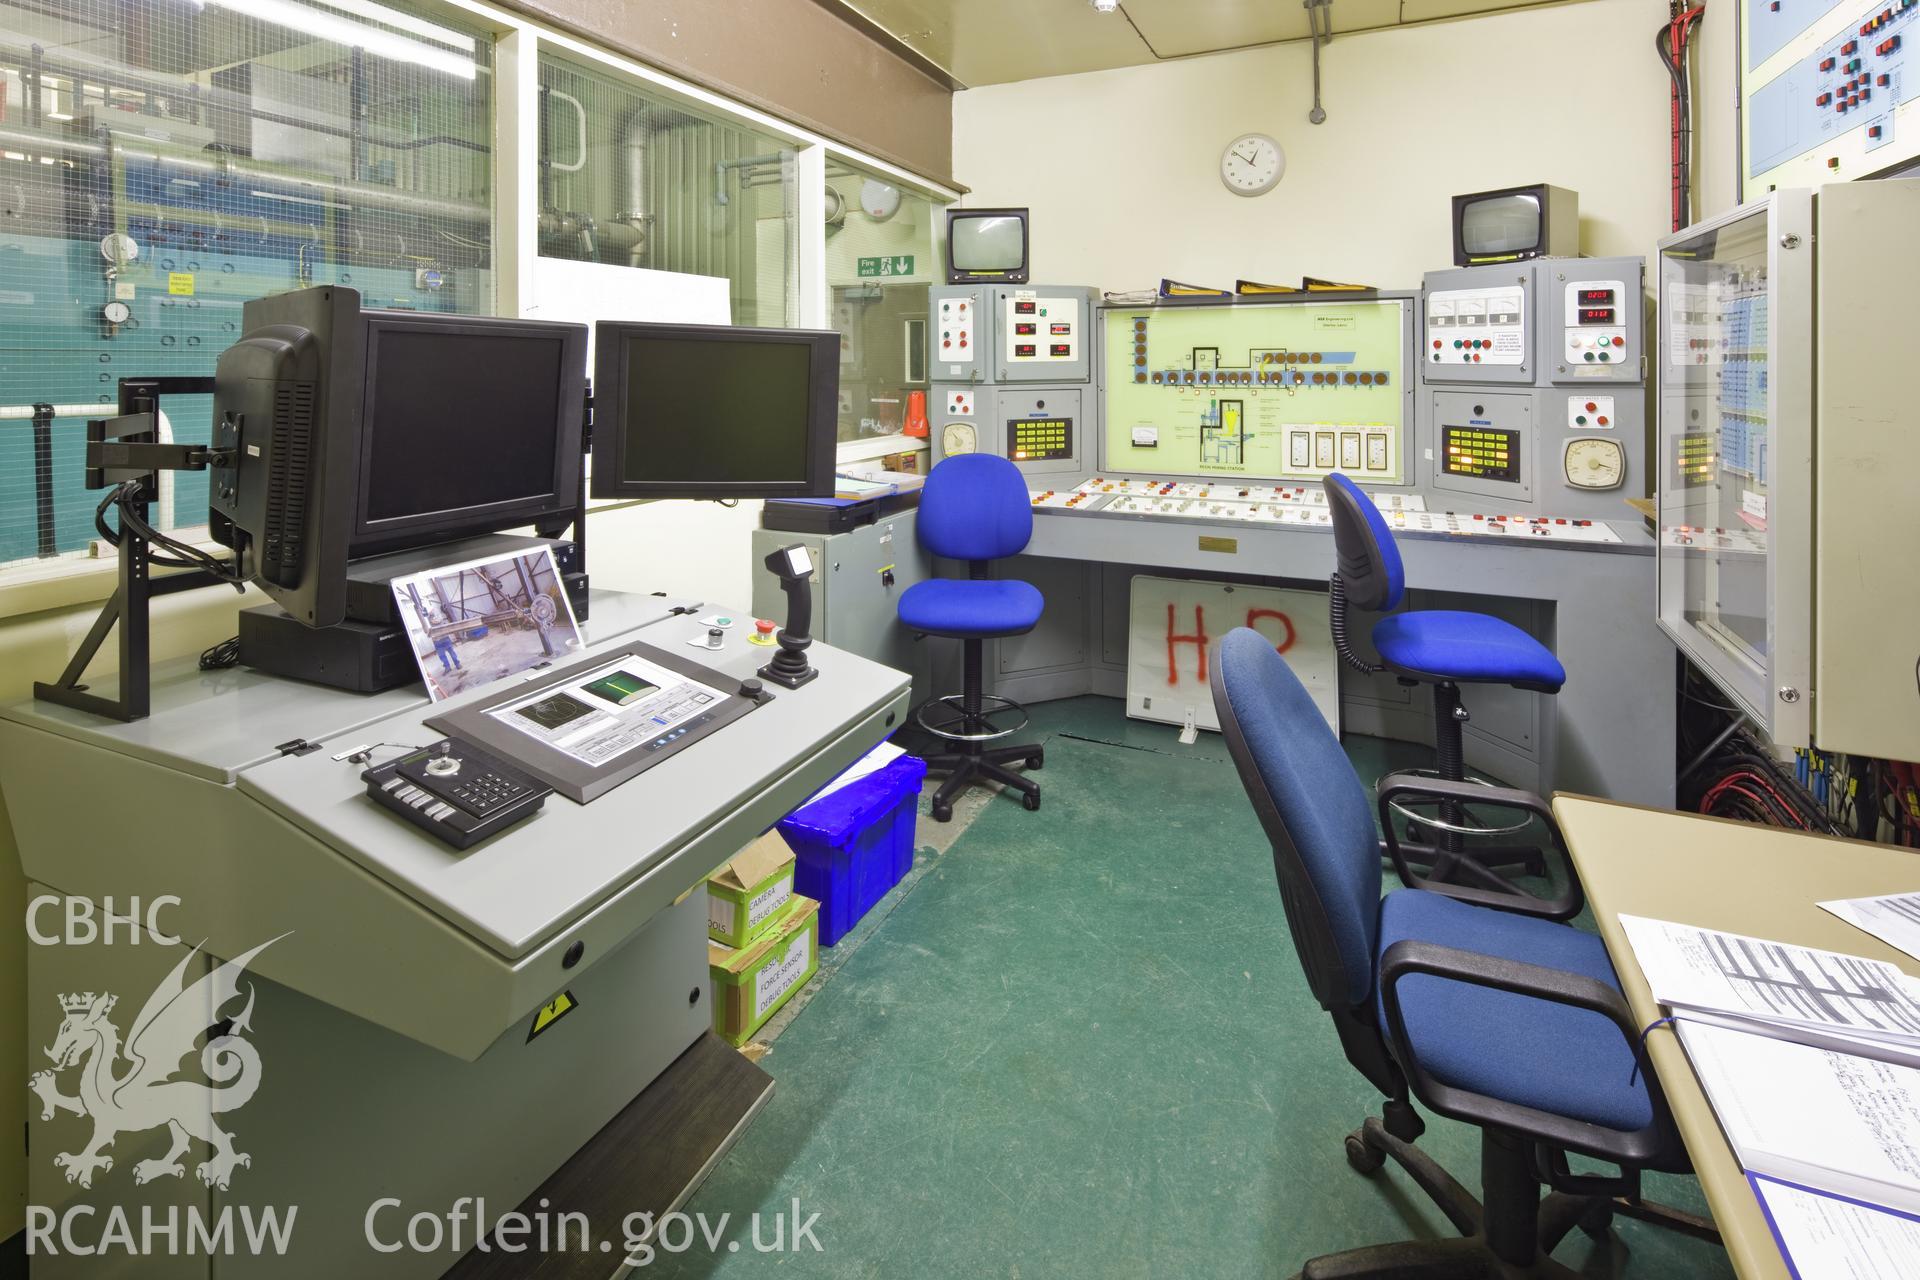 Inside the control room at the Resin Solidification Plant.